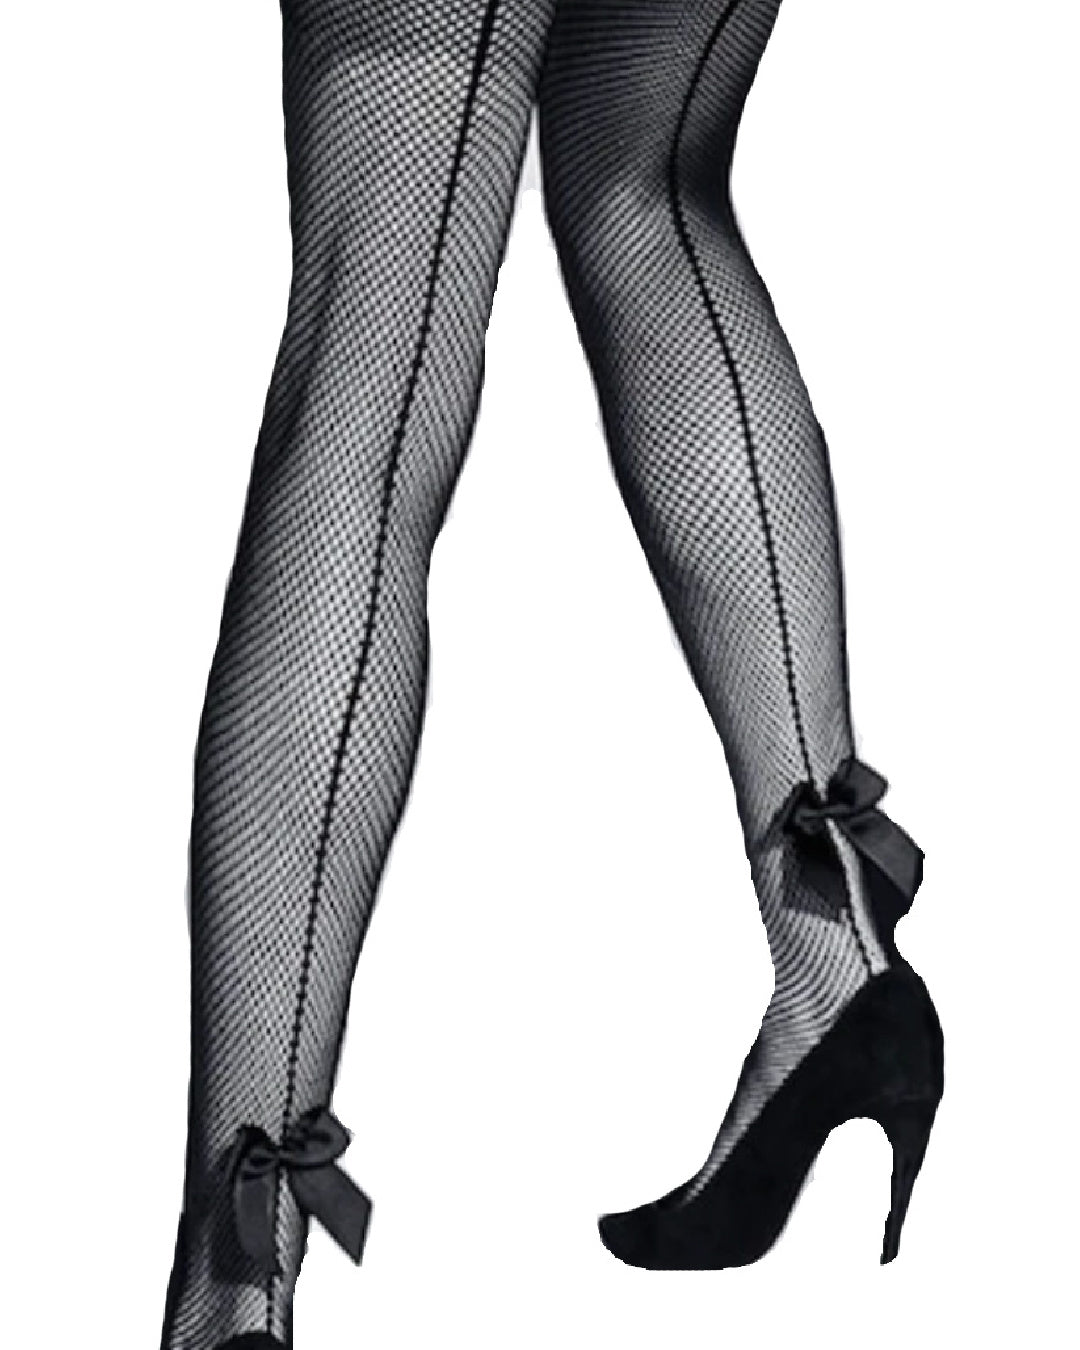 Elvgren- the 1940s Style Fishnet Pantyhose with Ankle Bows and Back Seams